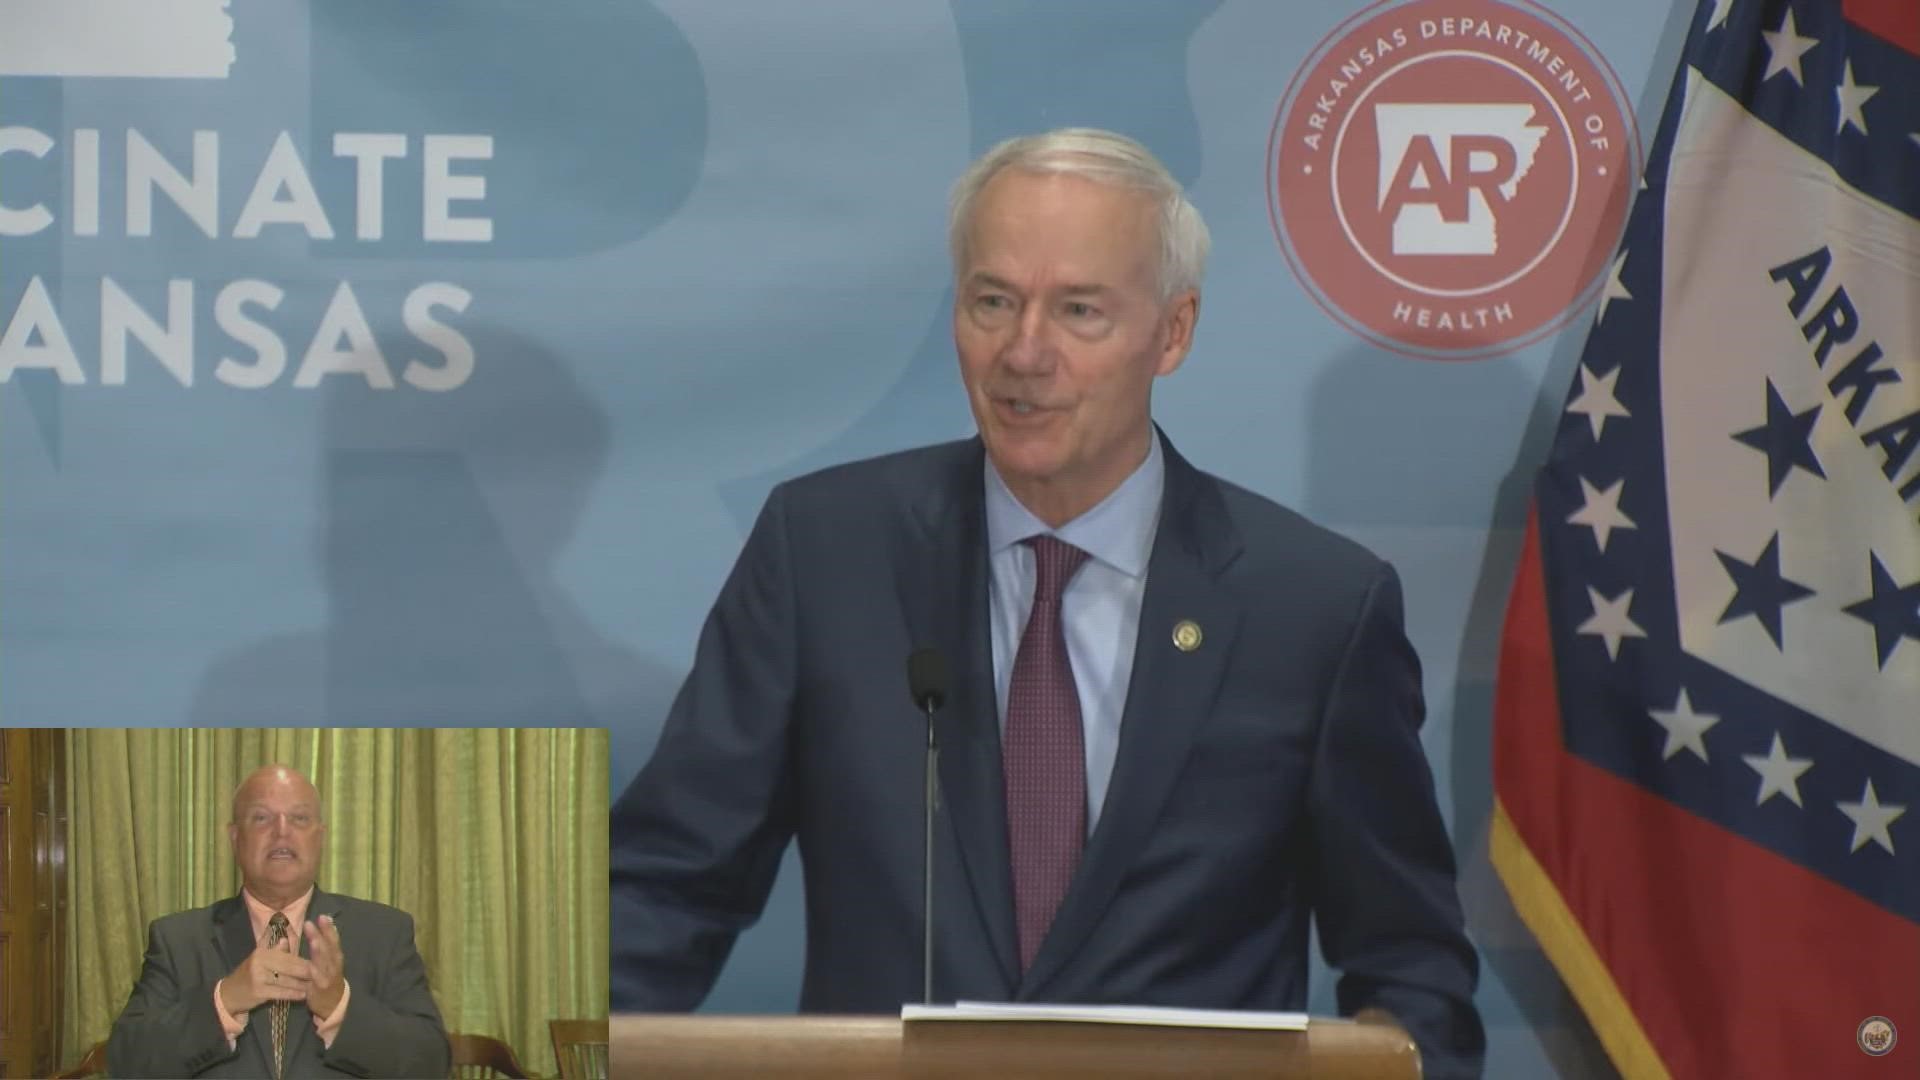 The Arkansas governor will be speaking following requests from Democrats to call a special session so that lawmakers can vote on lifting the ban on mask mandates.